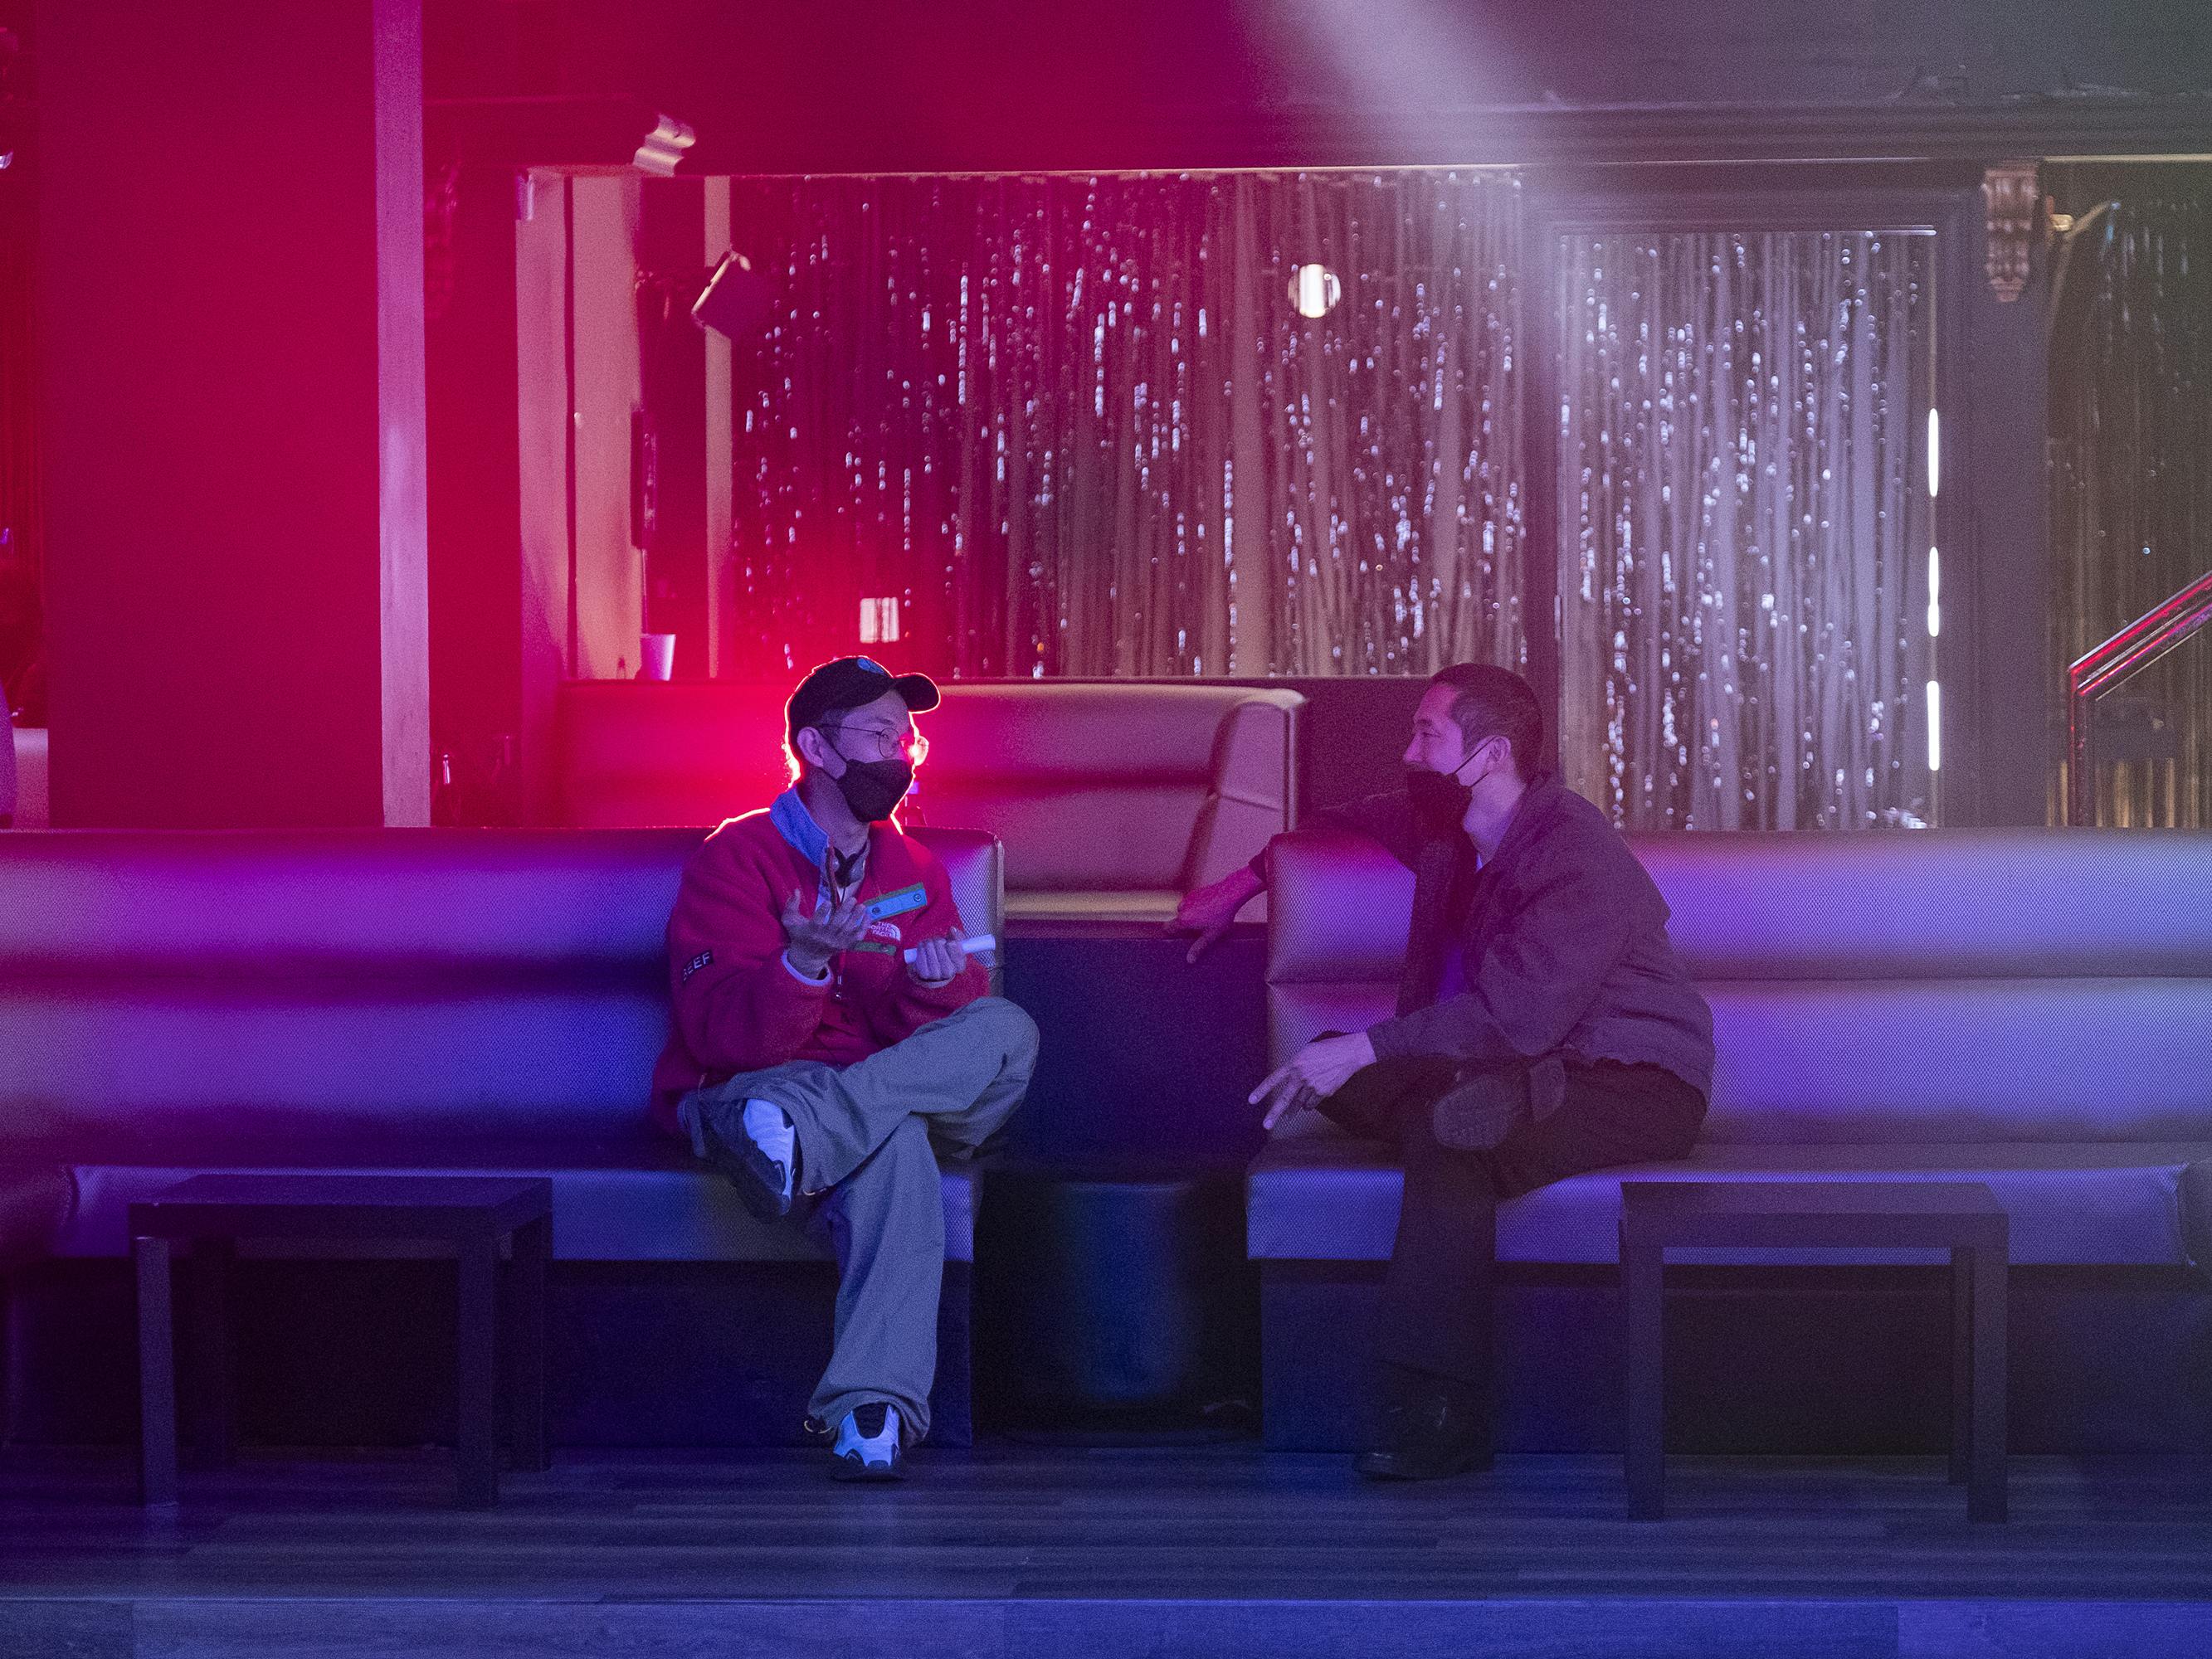 Lee Sung Jin and Steven Yeun sit together in a red-and-purple lit club set. 